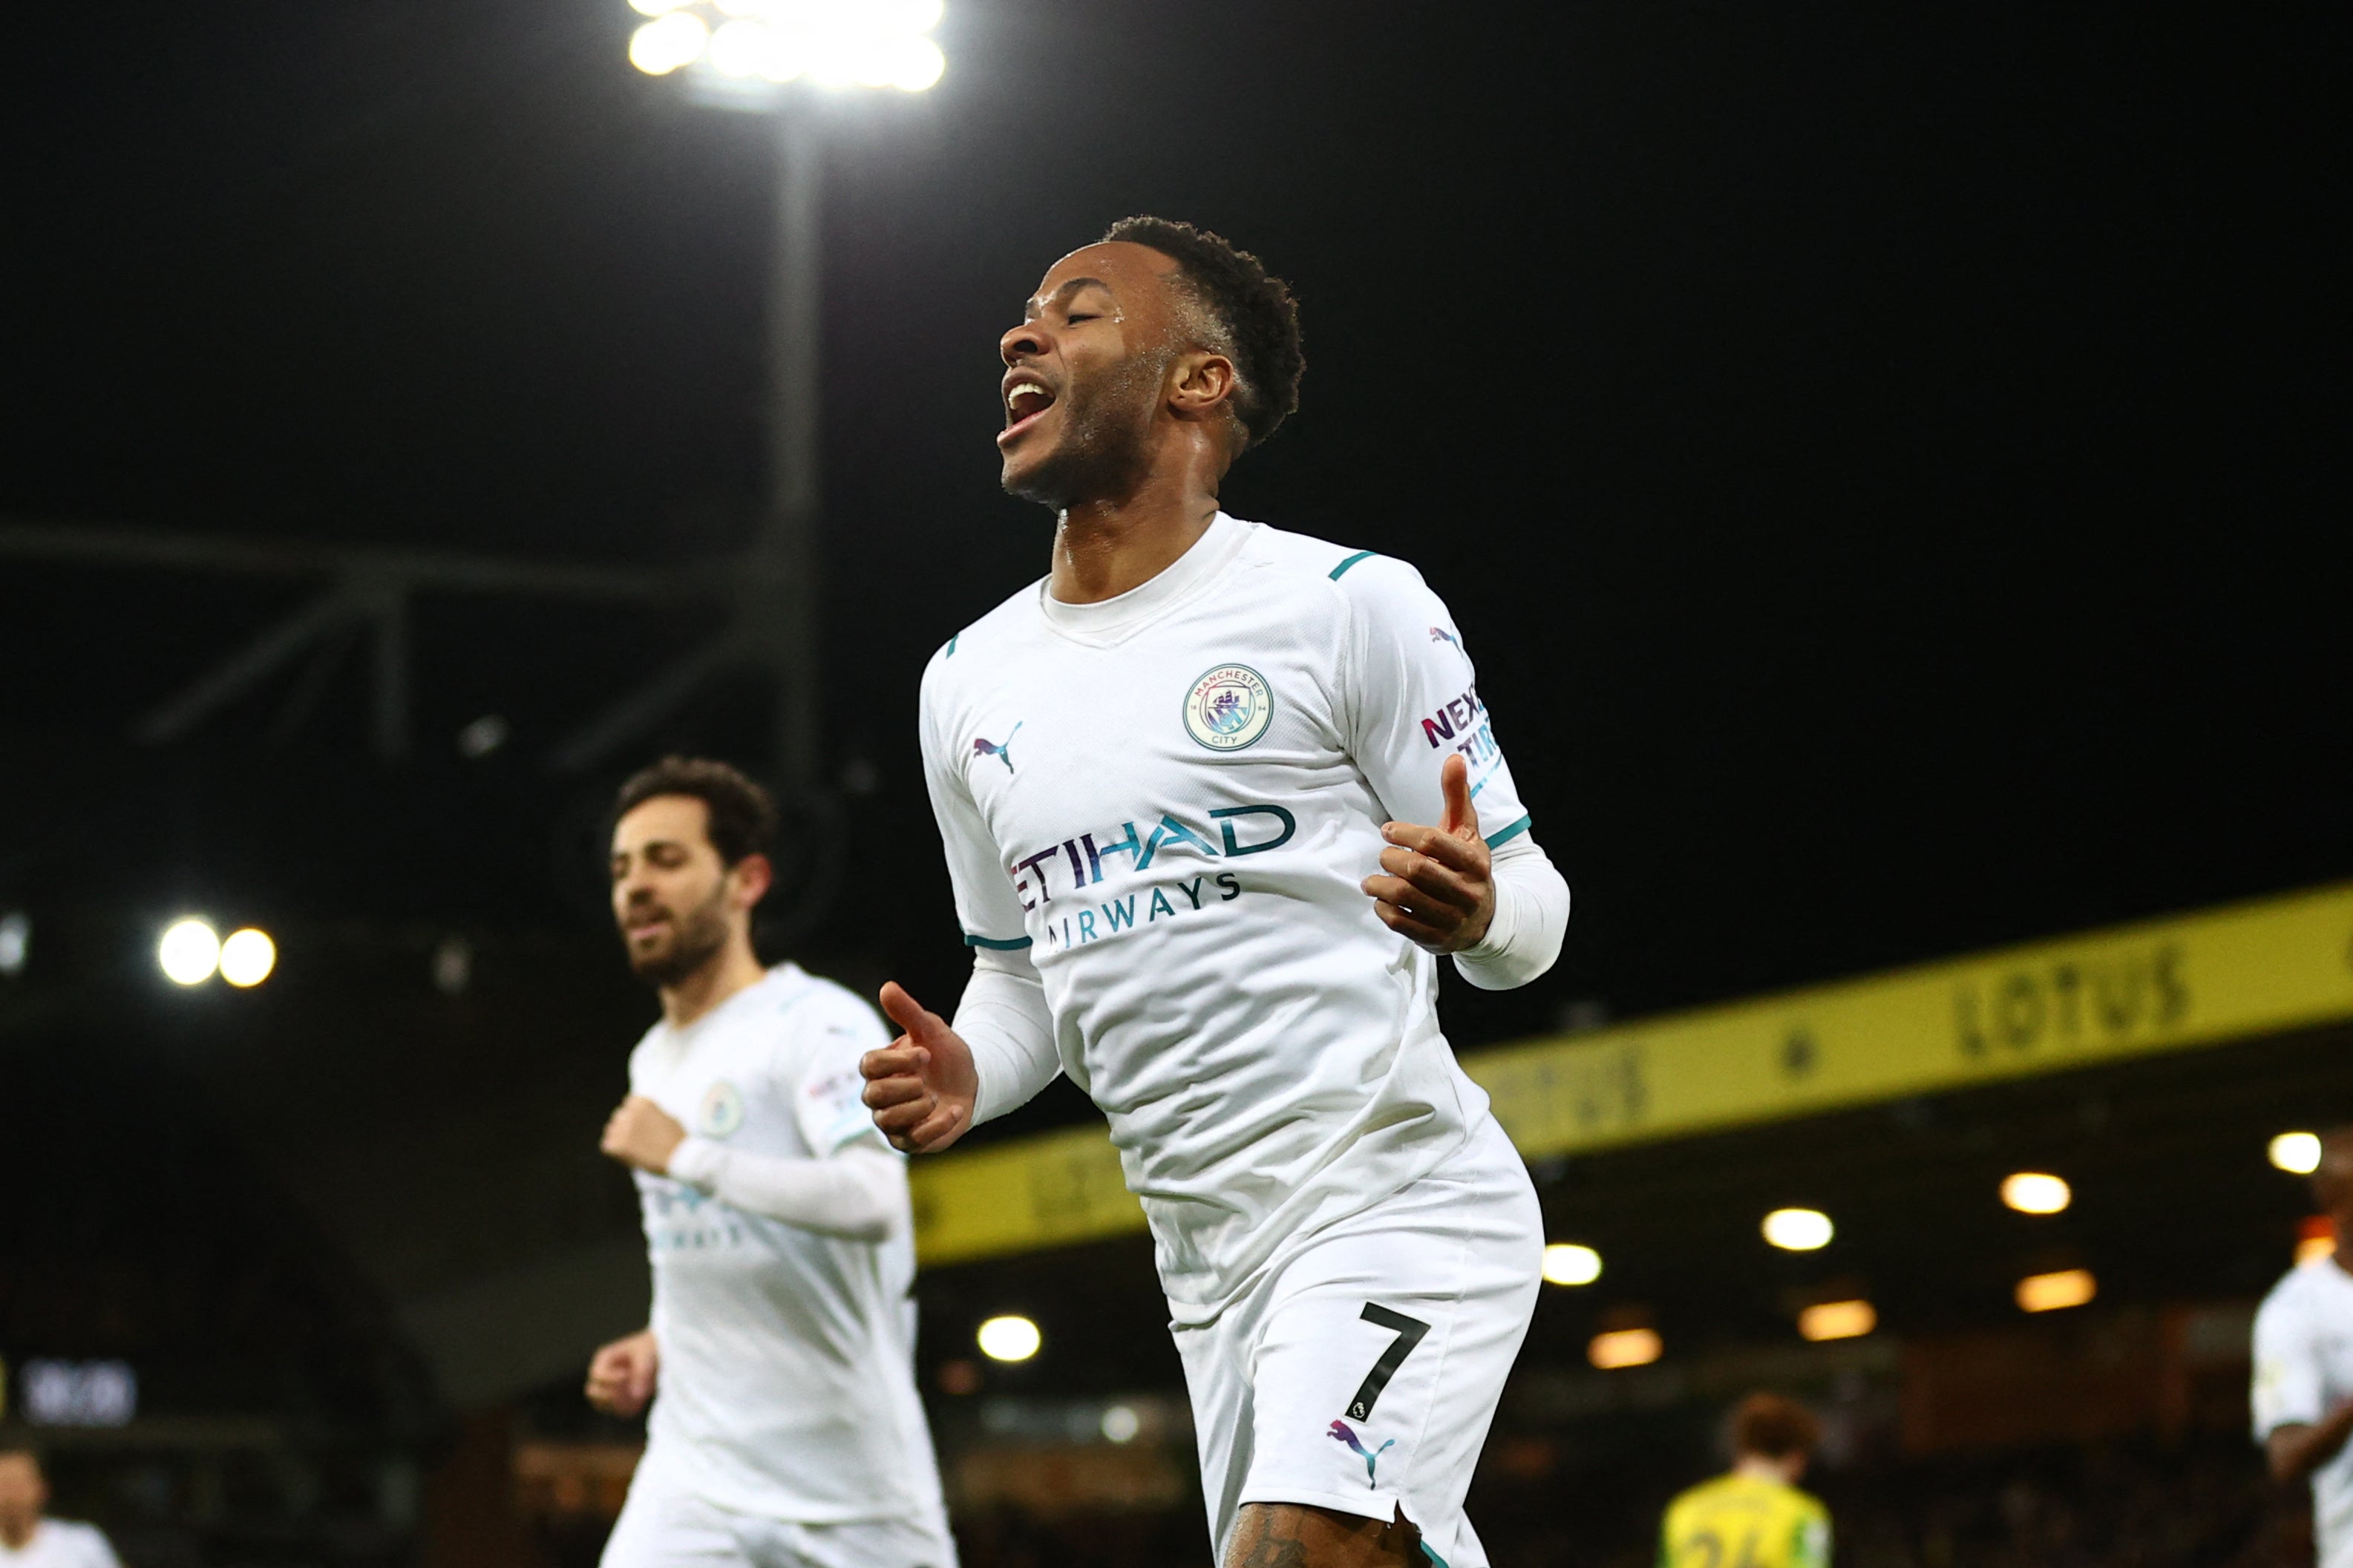 Raheem Sterling finished with the match ball as Manchester City thrashed Norwich